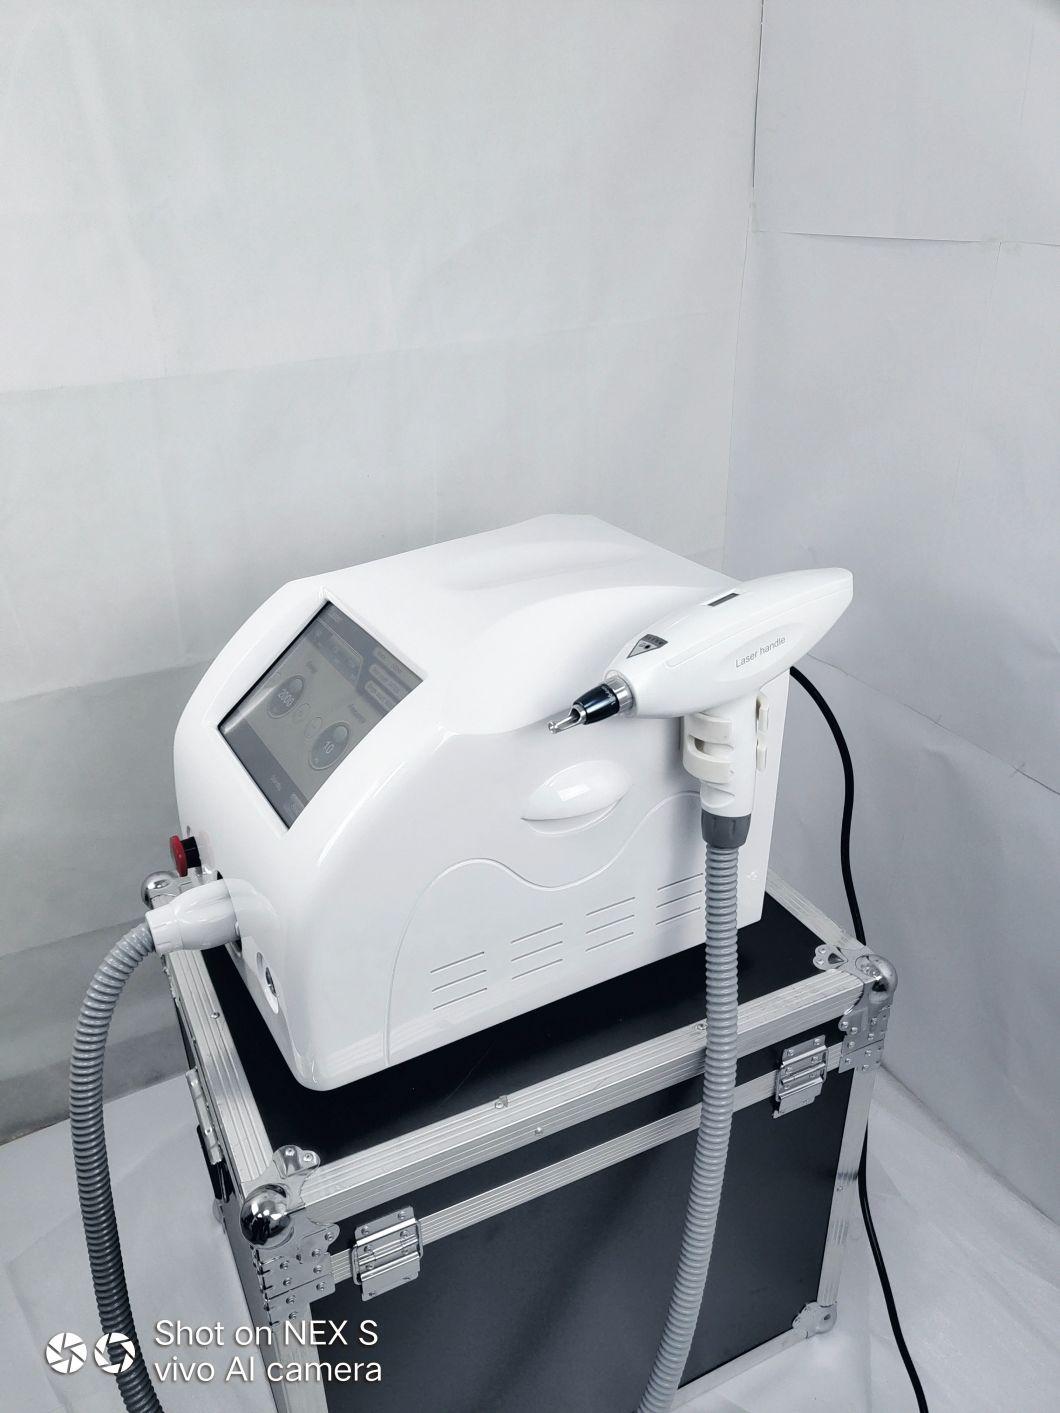 Best Selling Portable Ndyag Laser Q Switch ND YAG Laser Tattoo Removal